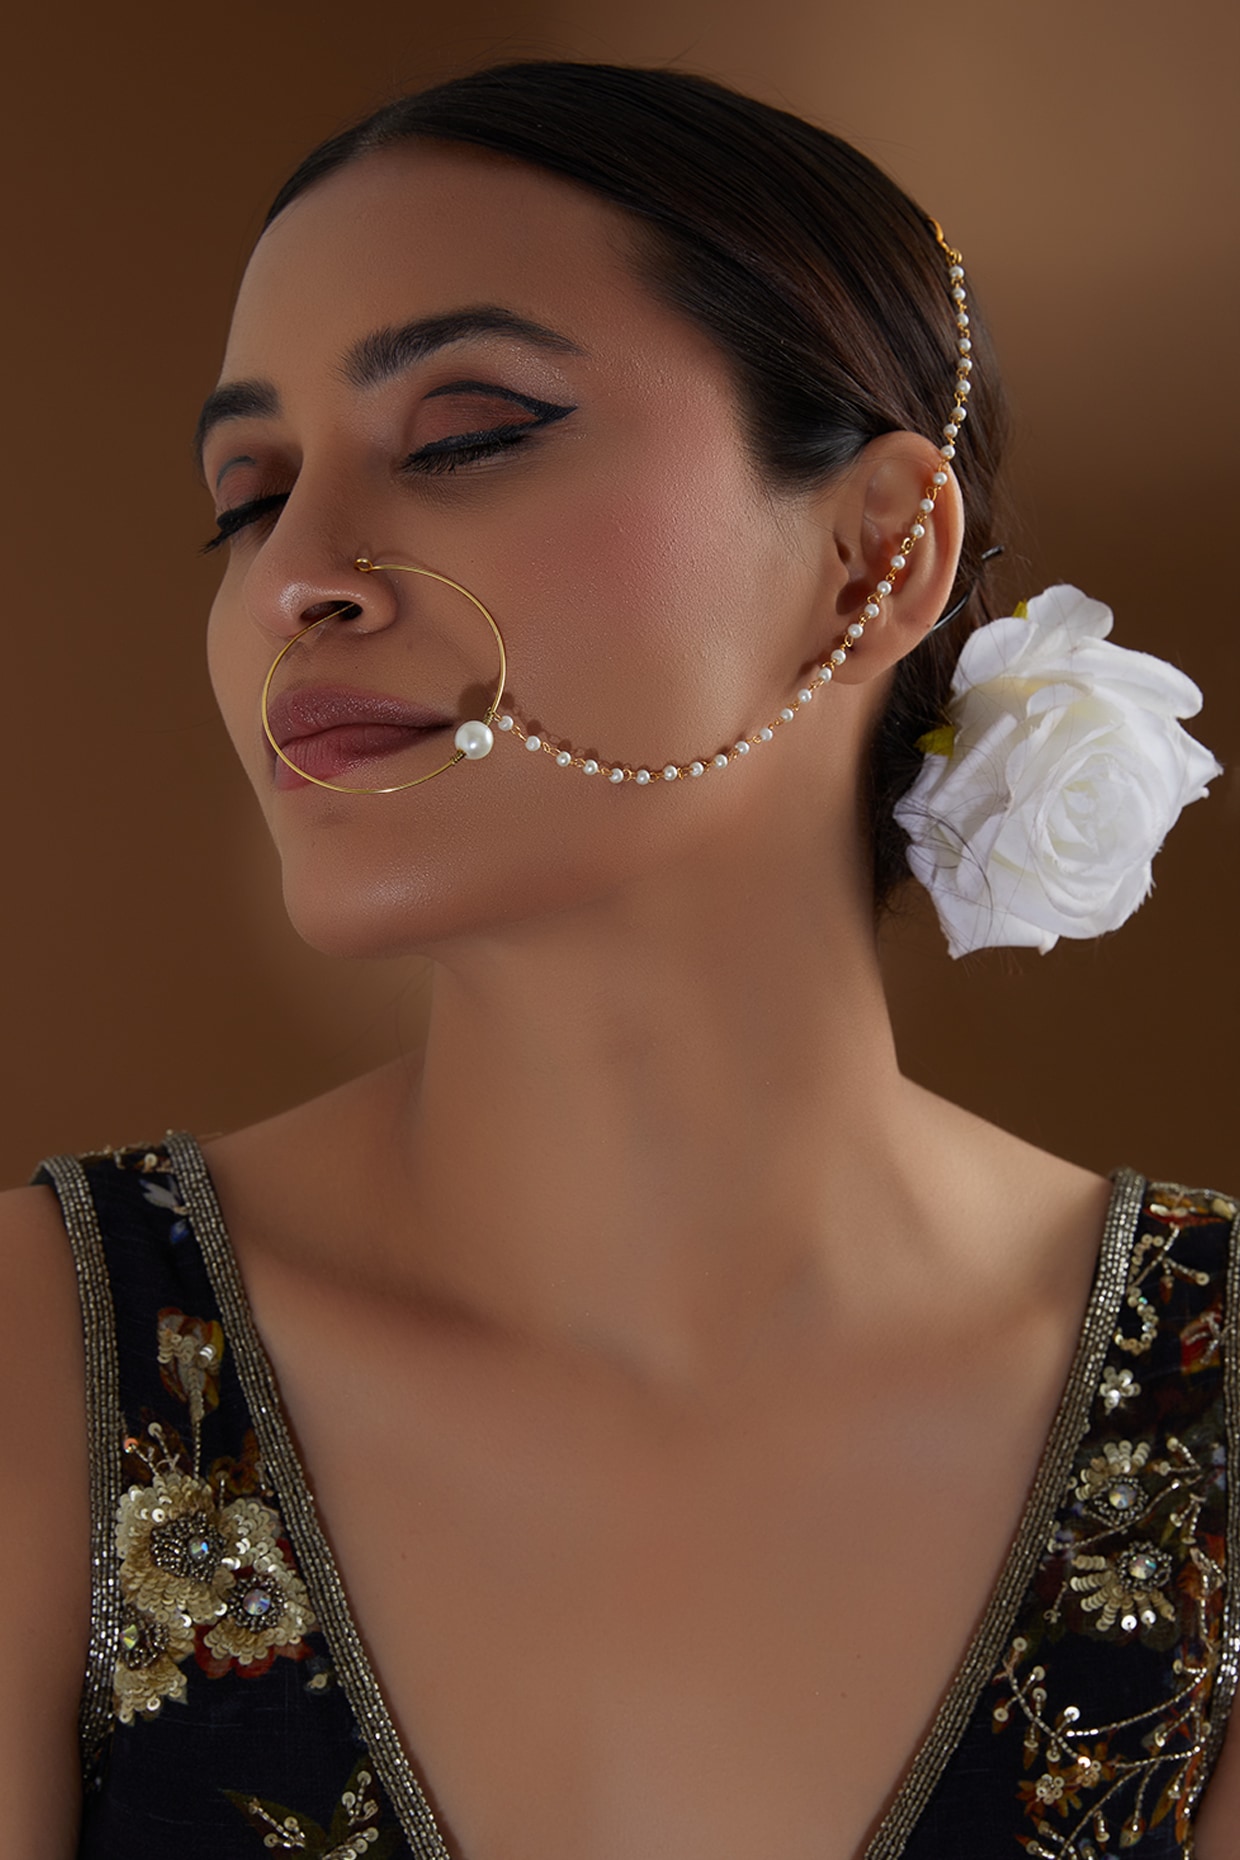 Buy Priyaasi Kundan Studded Nath for Women | Traditional Floral Design |  Bridal Nath for Wedding with Pearl Chain | Gold-Plated | Brass Metal | Bridal  Nose Ring - Without Piercing | Big Size at Amazon.in